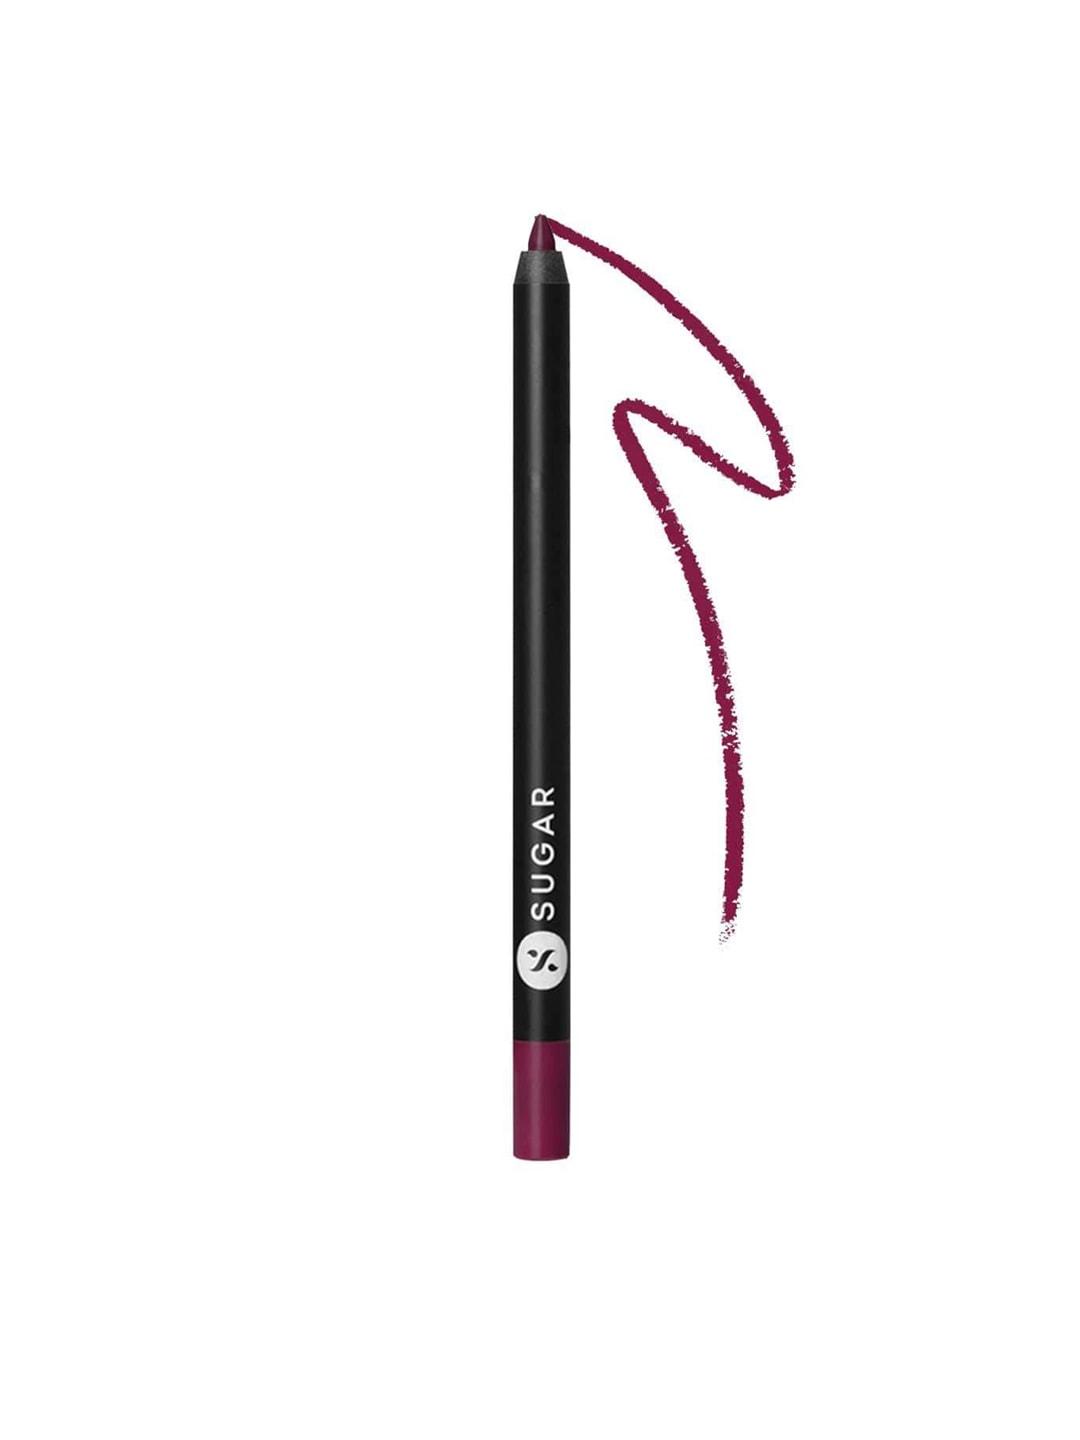 sugar cosmetics lipping on the edge lip liner - 07 fiery berry - 1.2 g